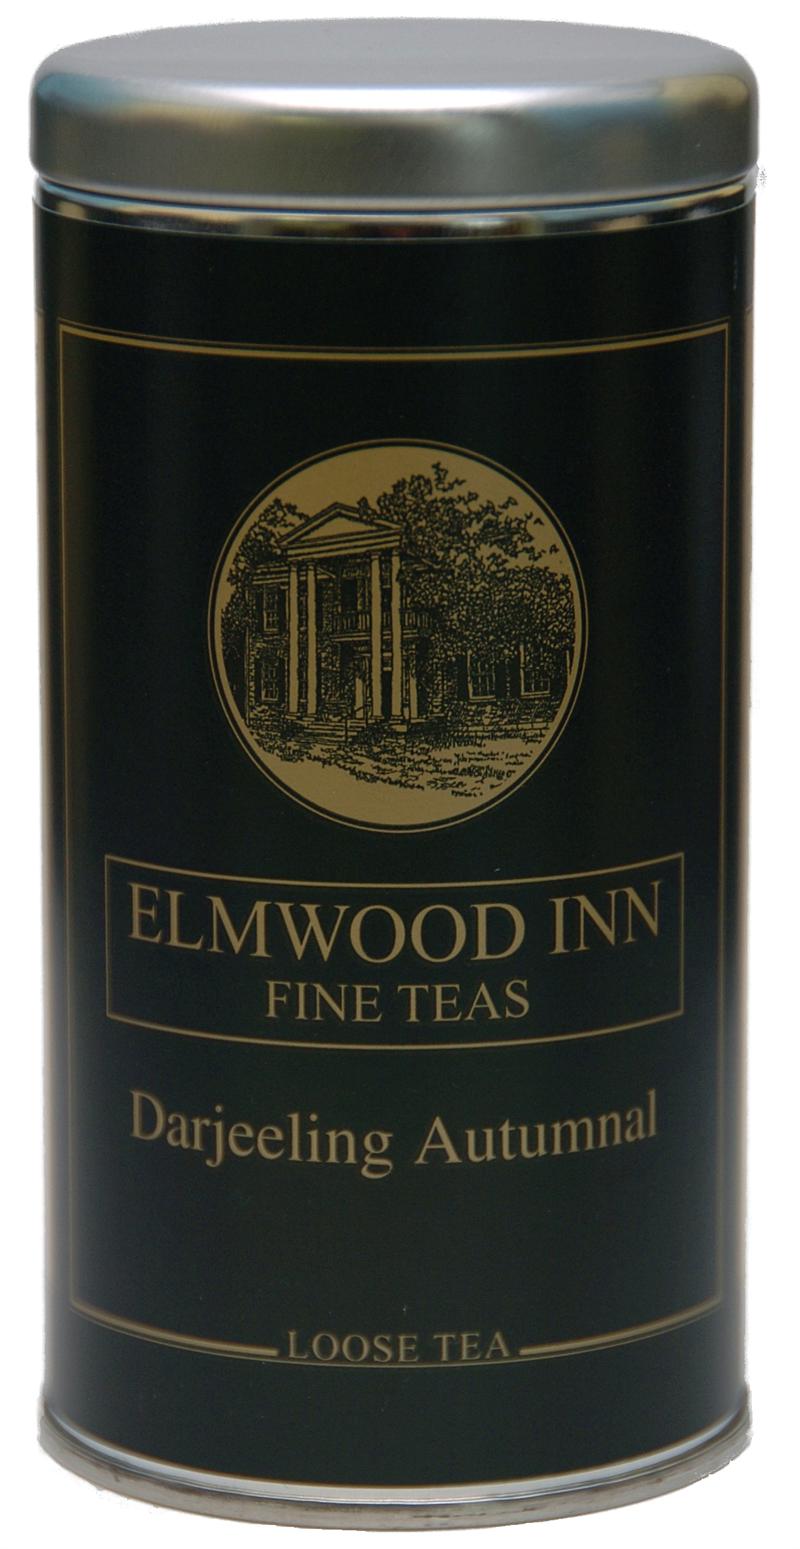 This is a full-bodied Darjeeling at an affordable price from one of Darjeeling's most historic and respected gardens.